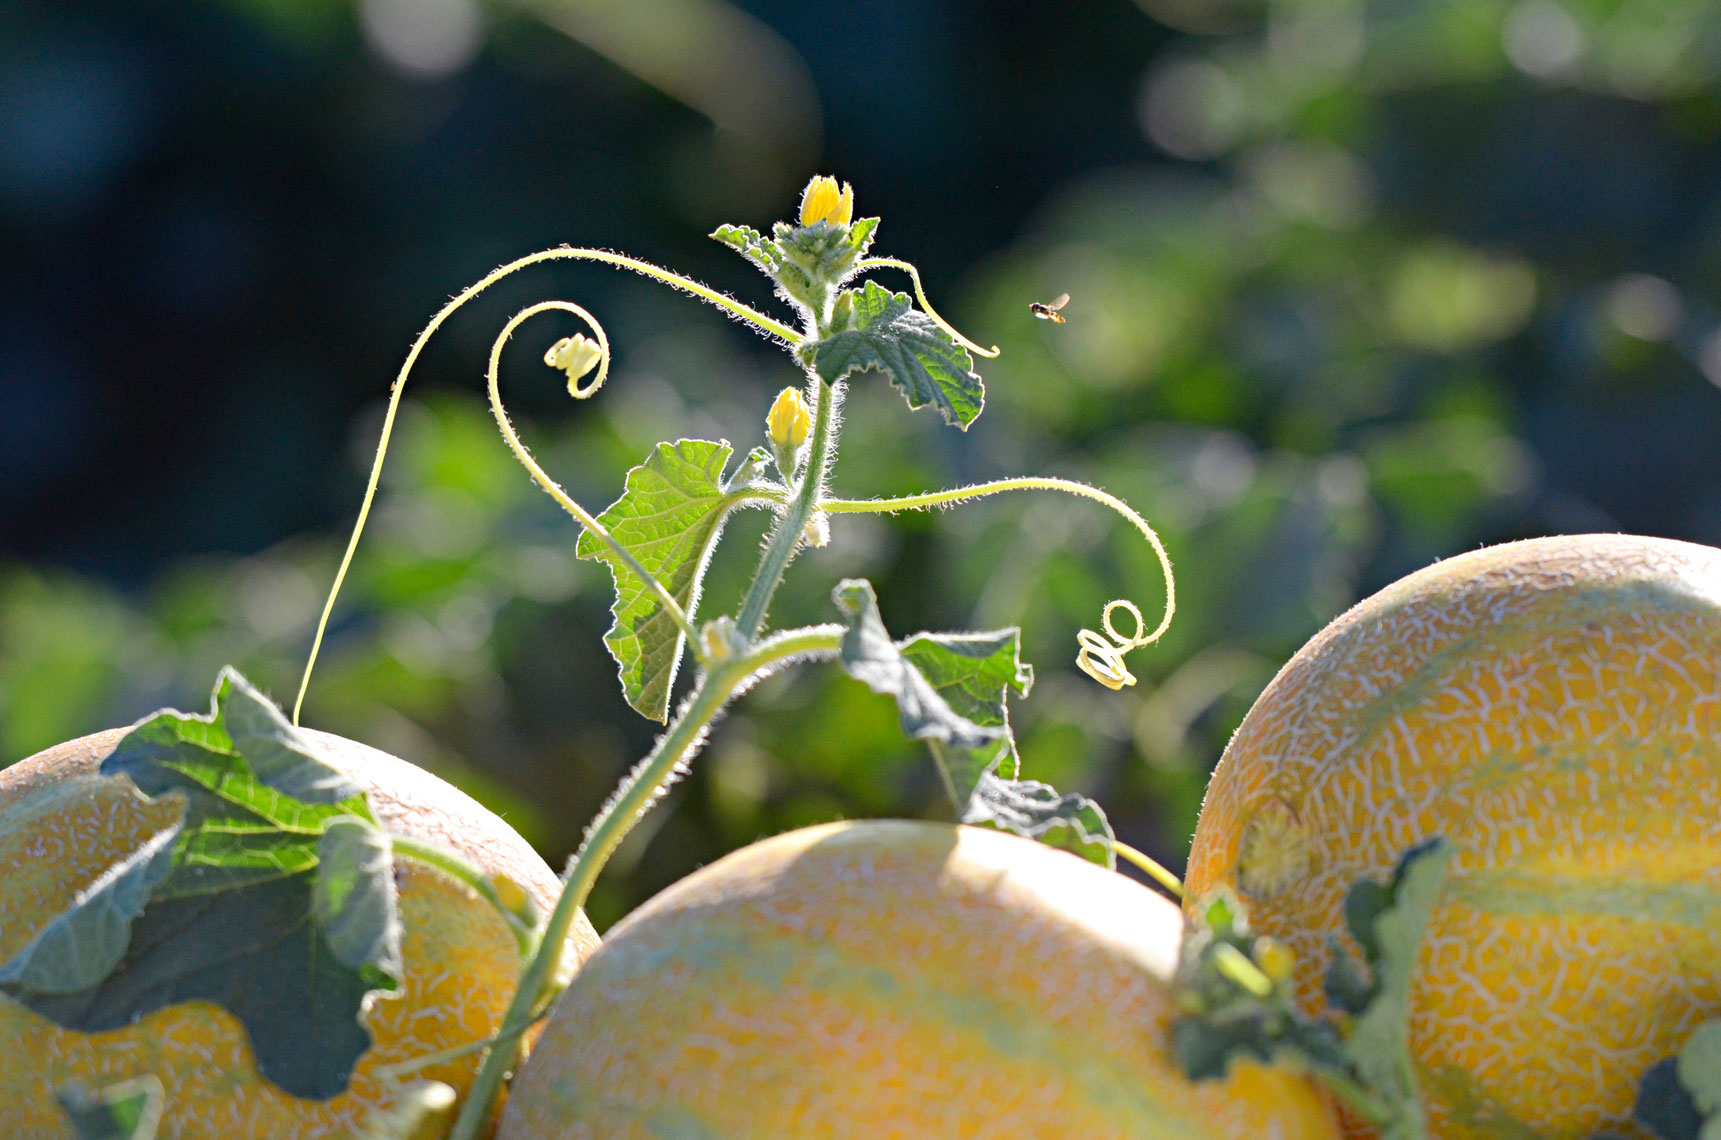 Agriculture-photography-of-Yellow-European-Melon-on-vine-with-flowers-in-the-field-at-sunset-